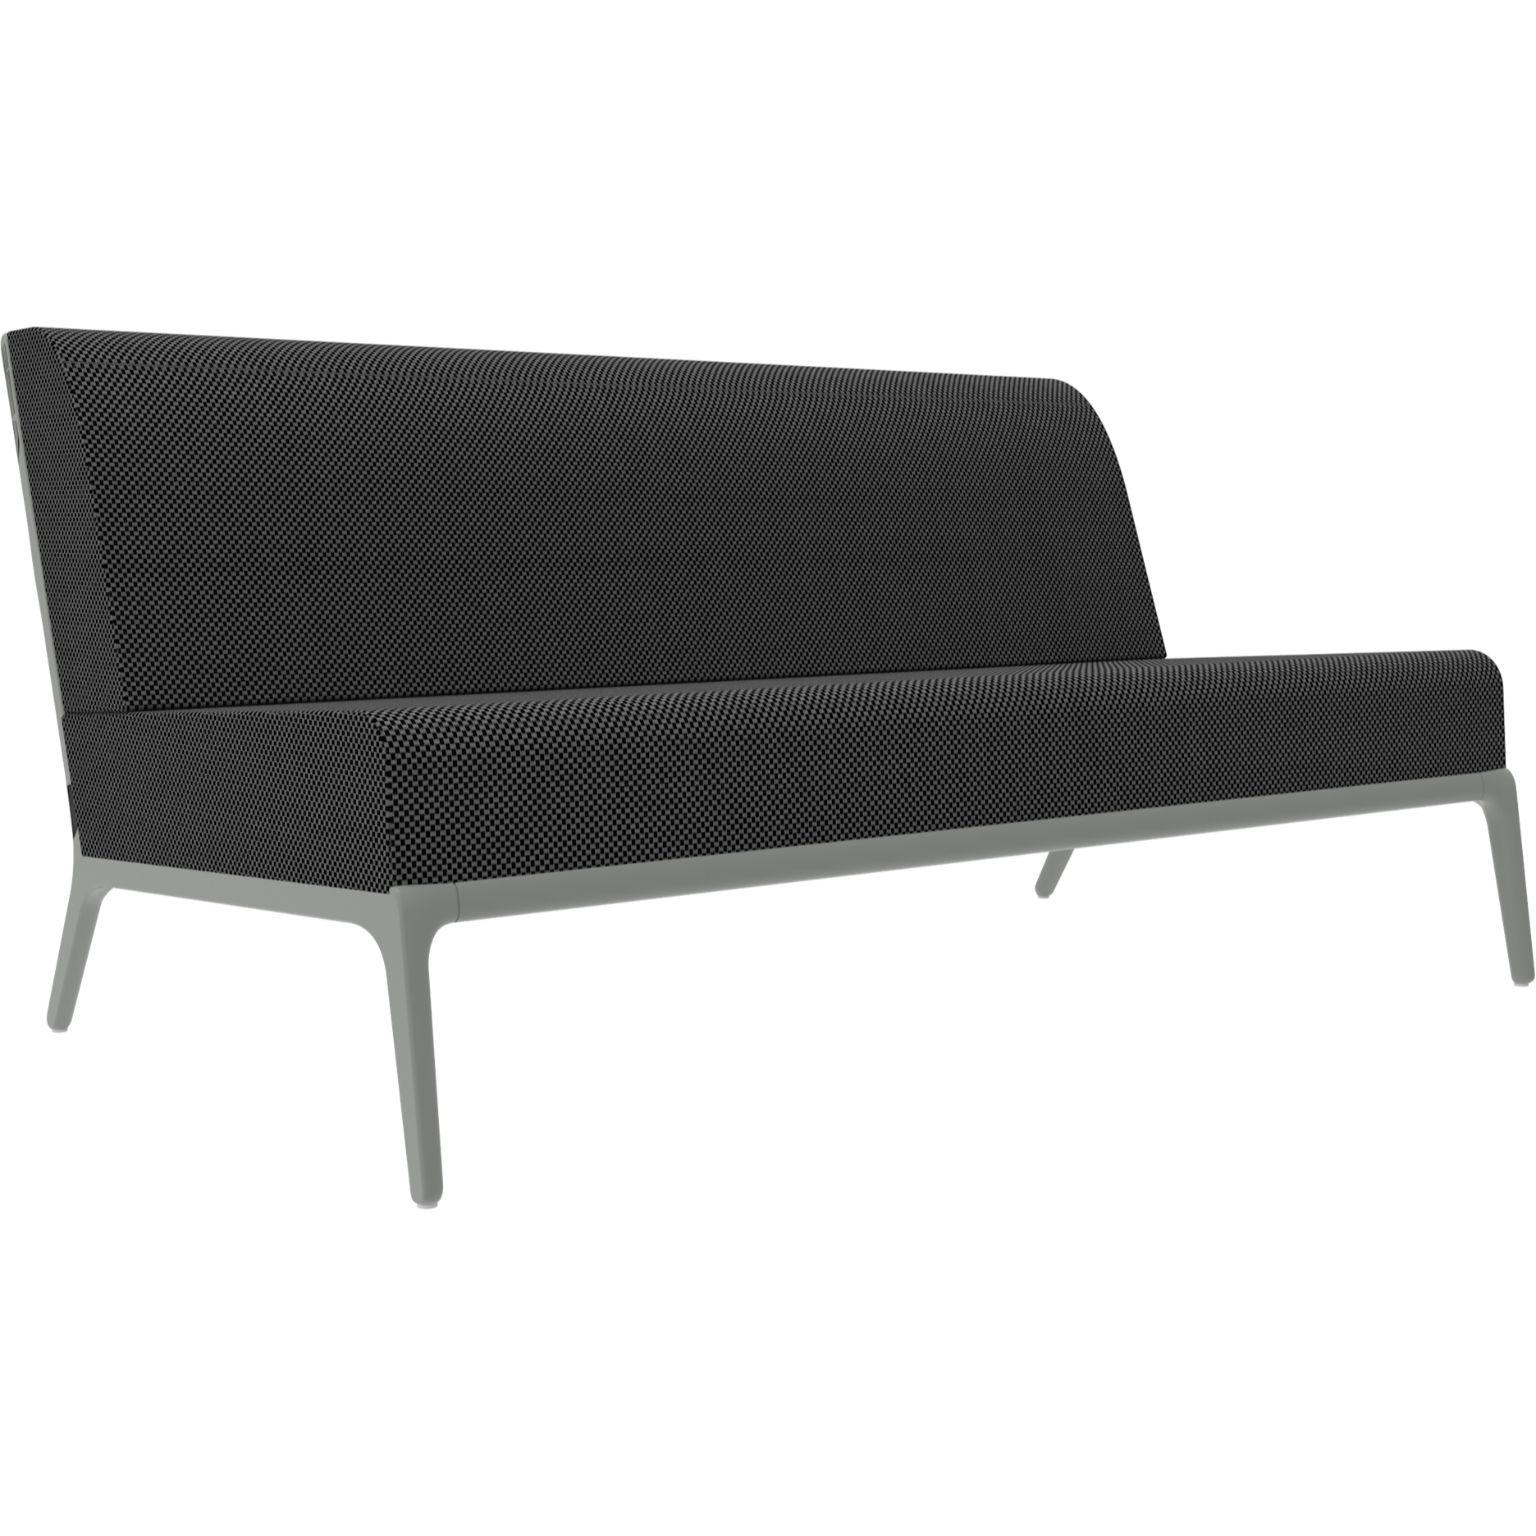 Xaloc central 160 silver modular sofa by MOWEE
Dimensions: D100 x W160 x H81 cm (Seat Height 42cm)
Material: Aluminium, Textile
Weight: 35.5 kg
Also Available in different colours and finishes. 

 Xaloc synthesizes the lines of interior